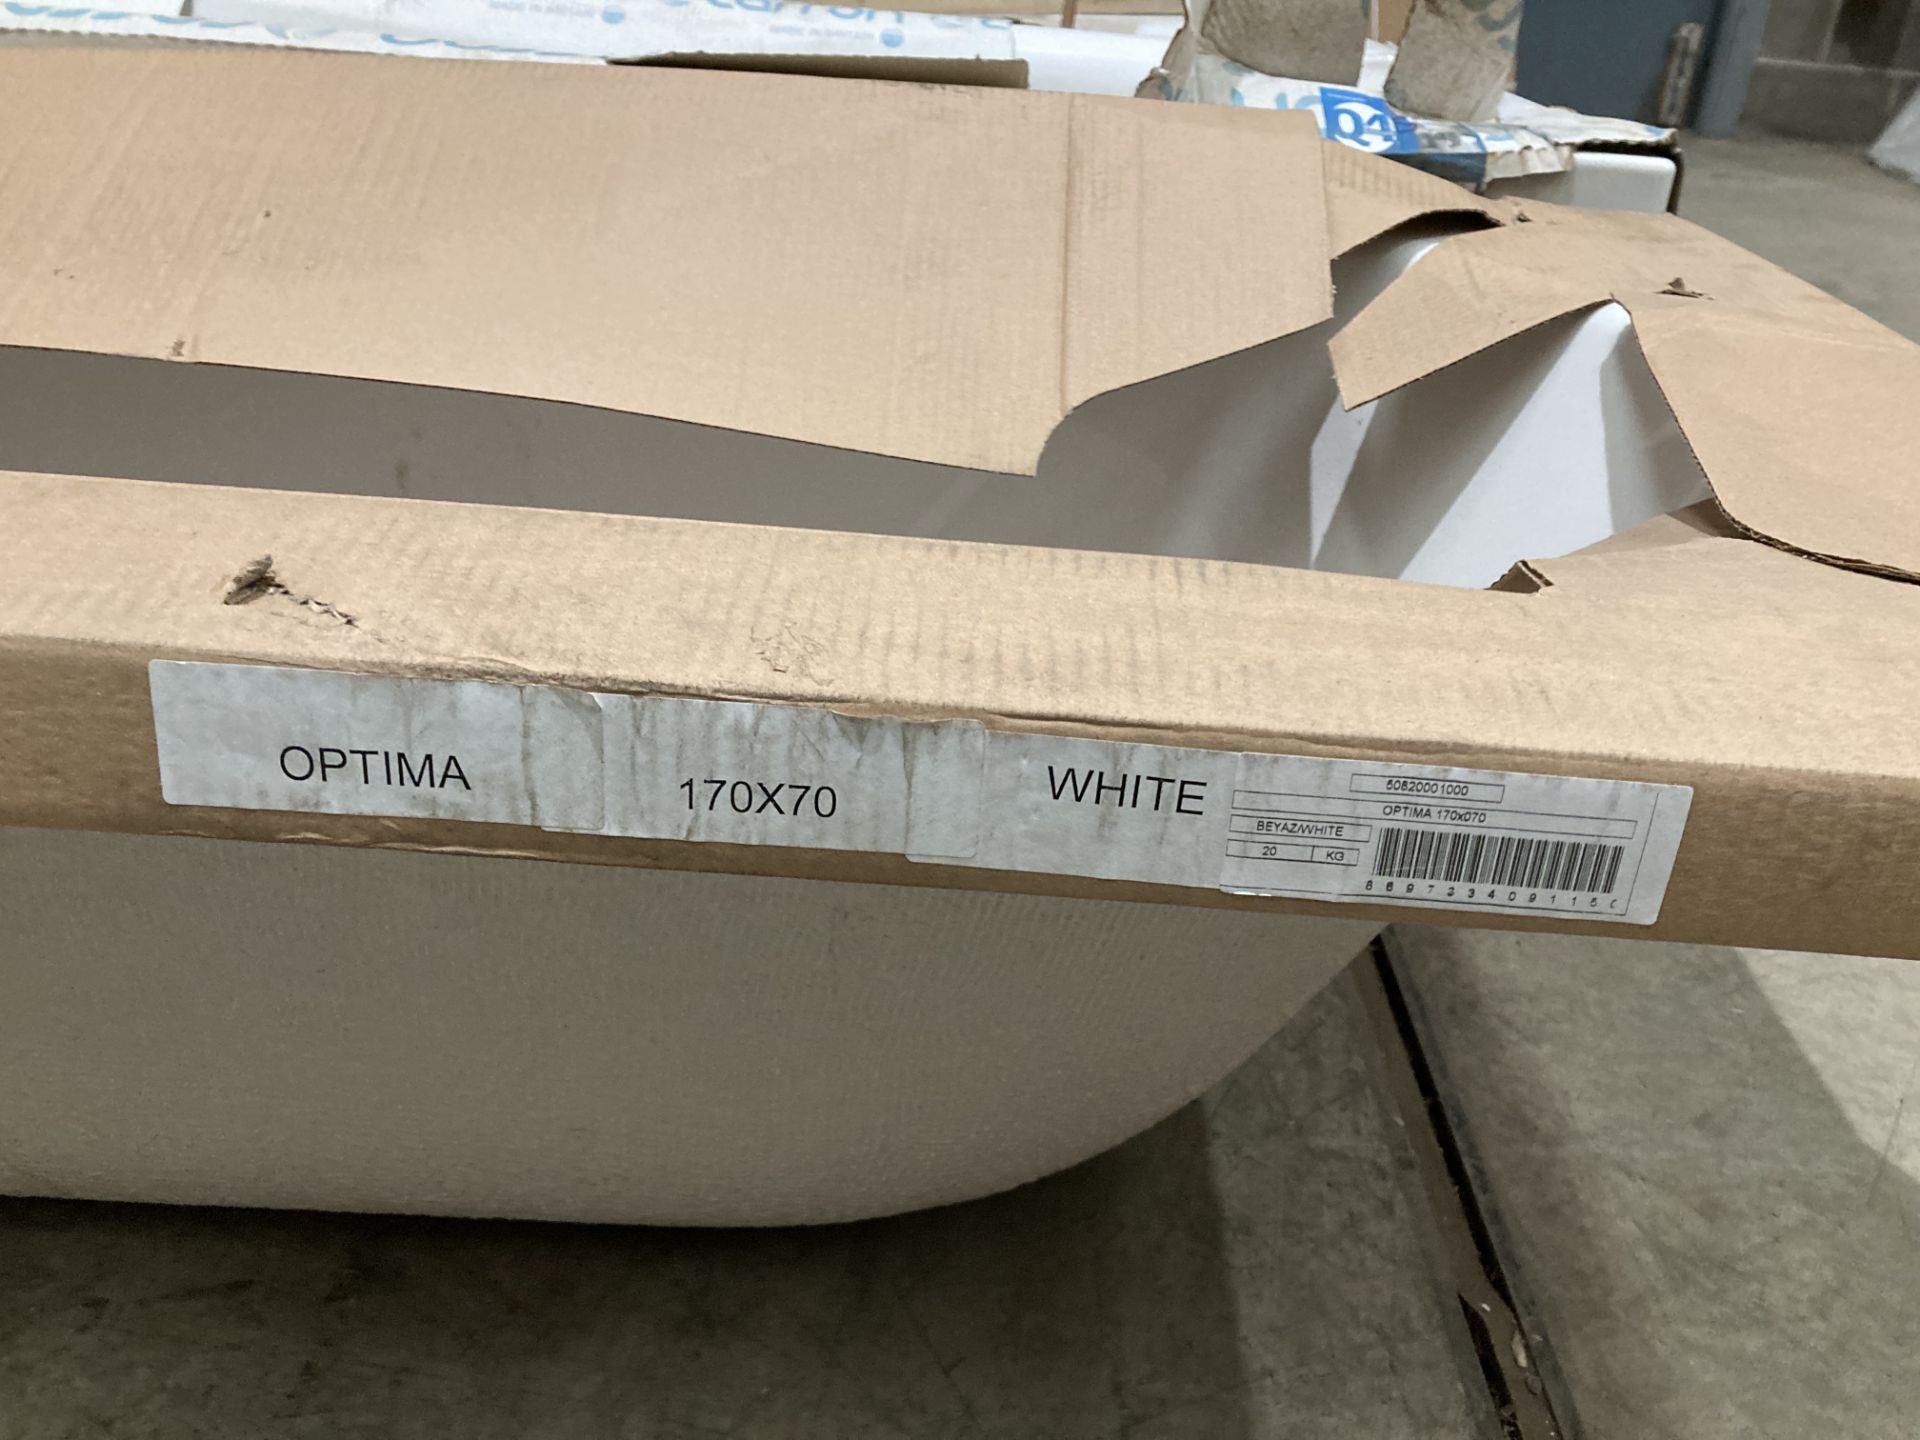 Optima fibreglass bath 1700mm x 700mm in white complete with leg set (saleroom location: RB) - Image 2 of 2